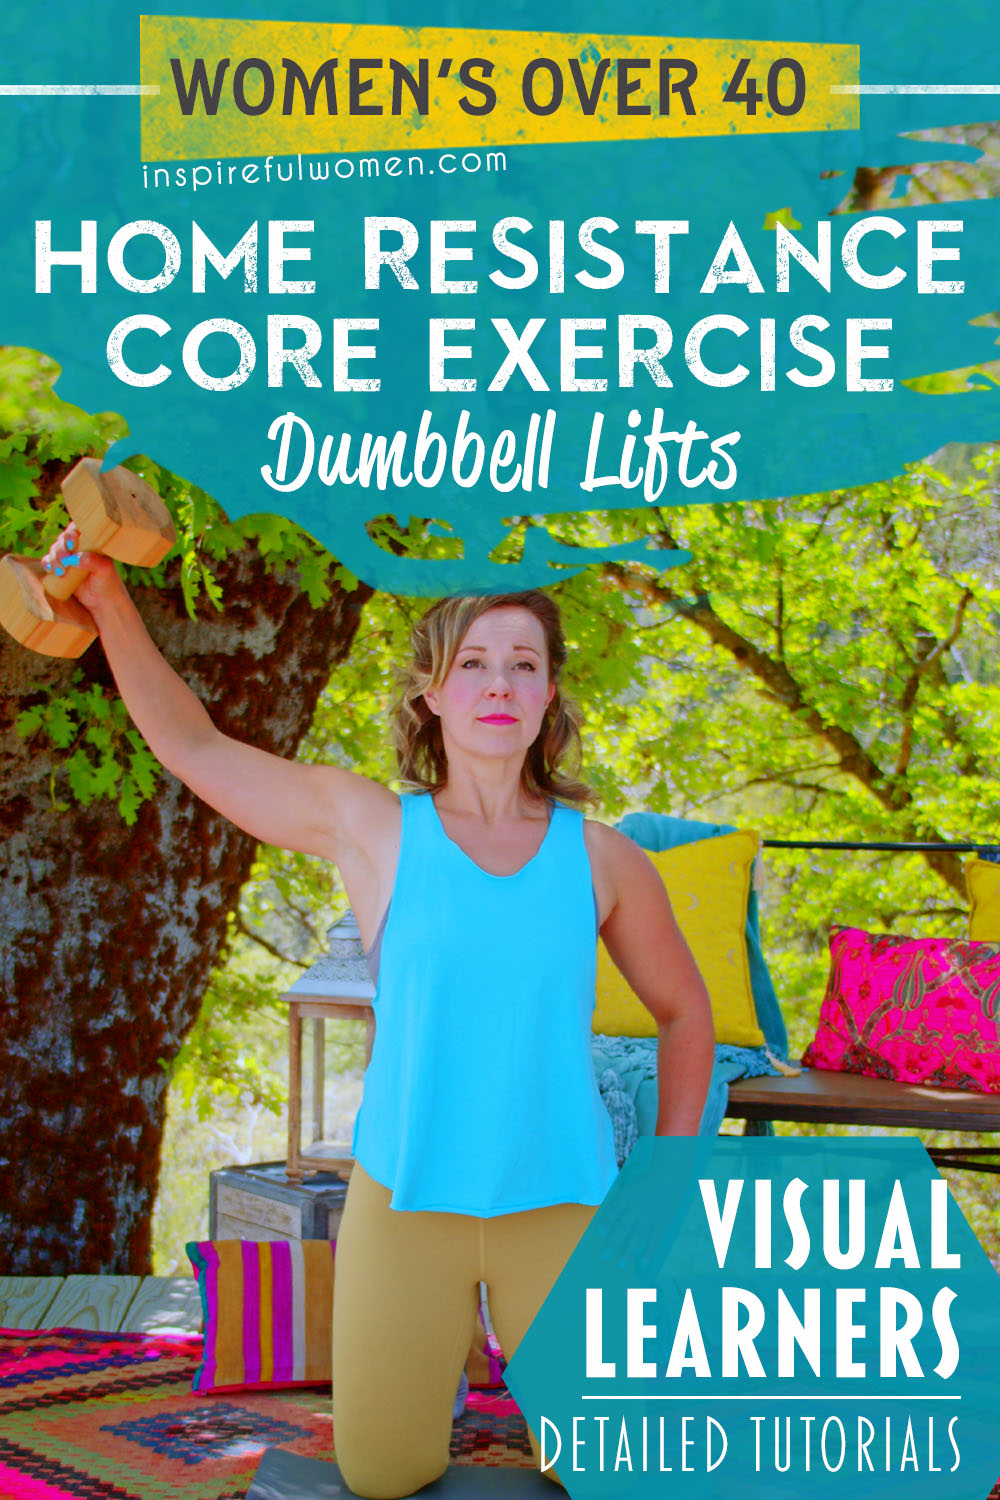 dumbbell-lifts-standing-strengthening-abs-core-exercise-proper-form-women-40-plus